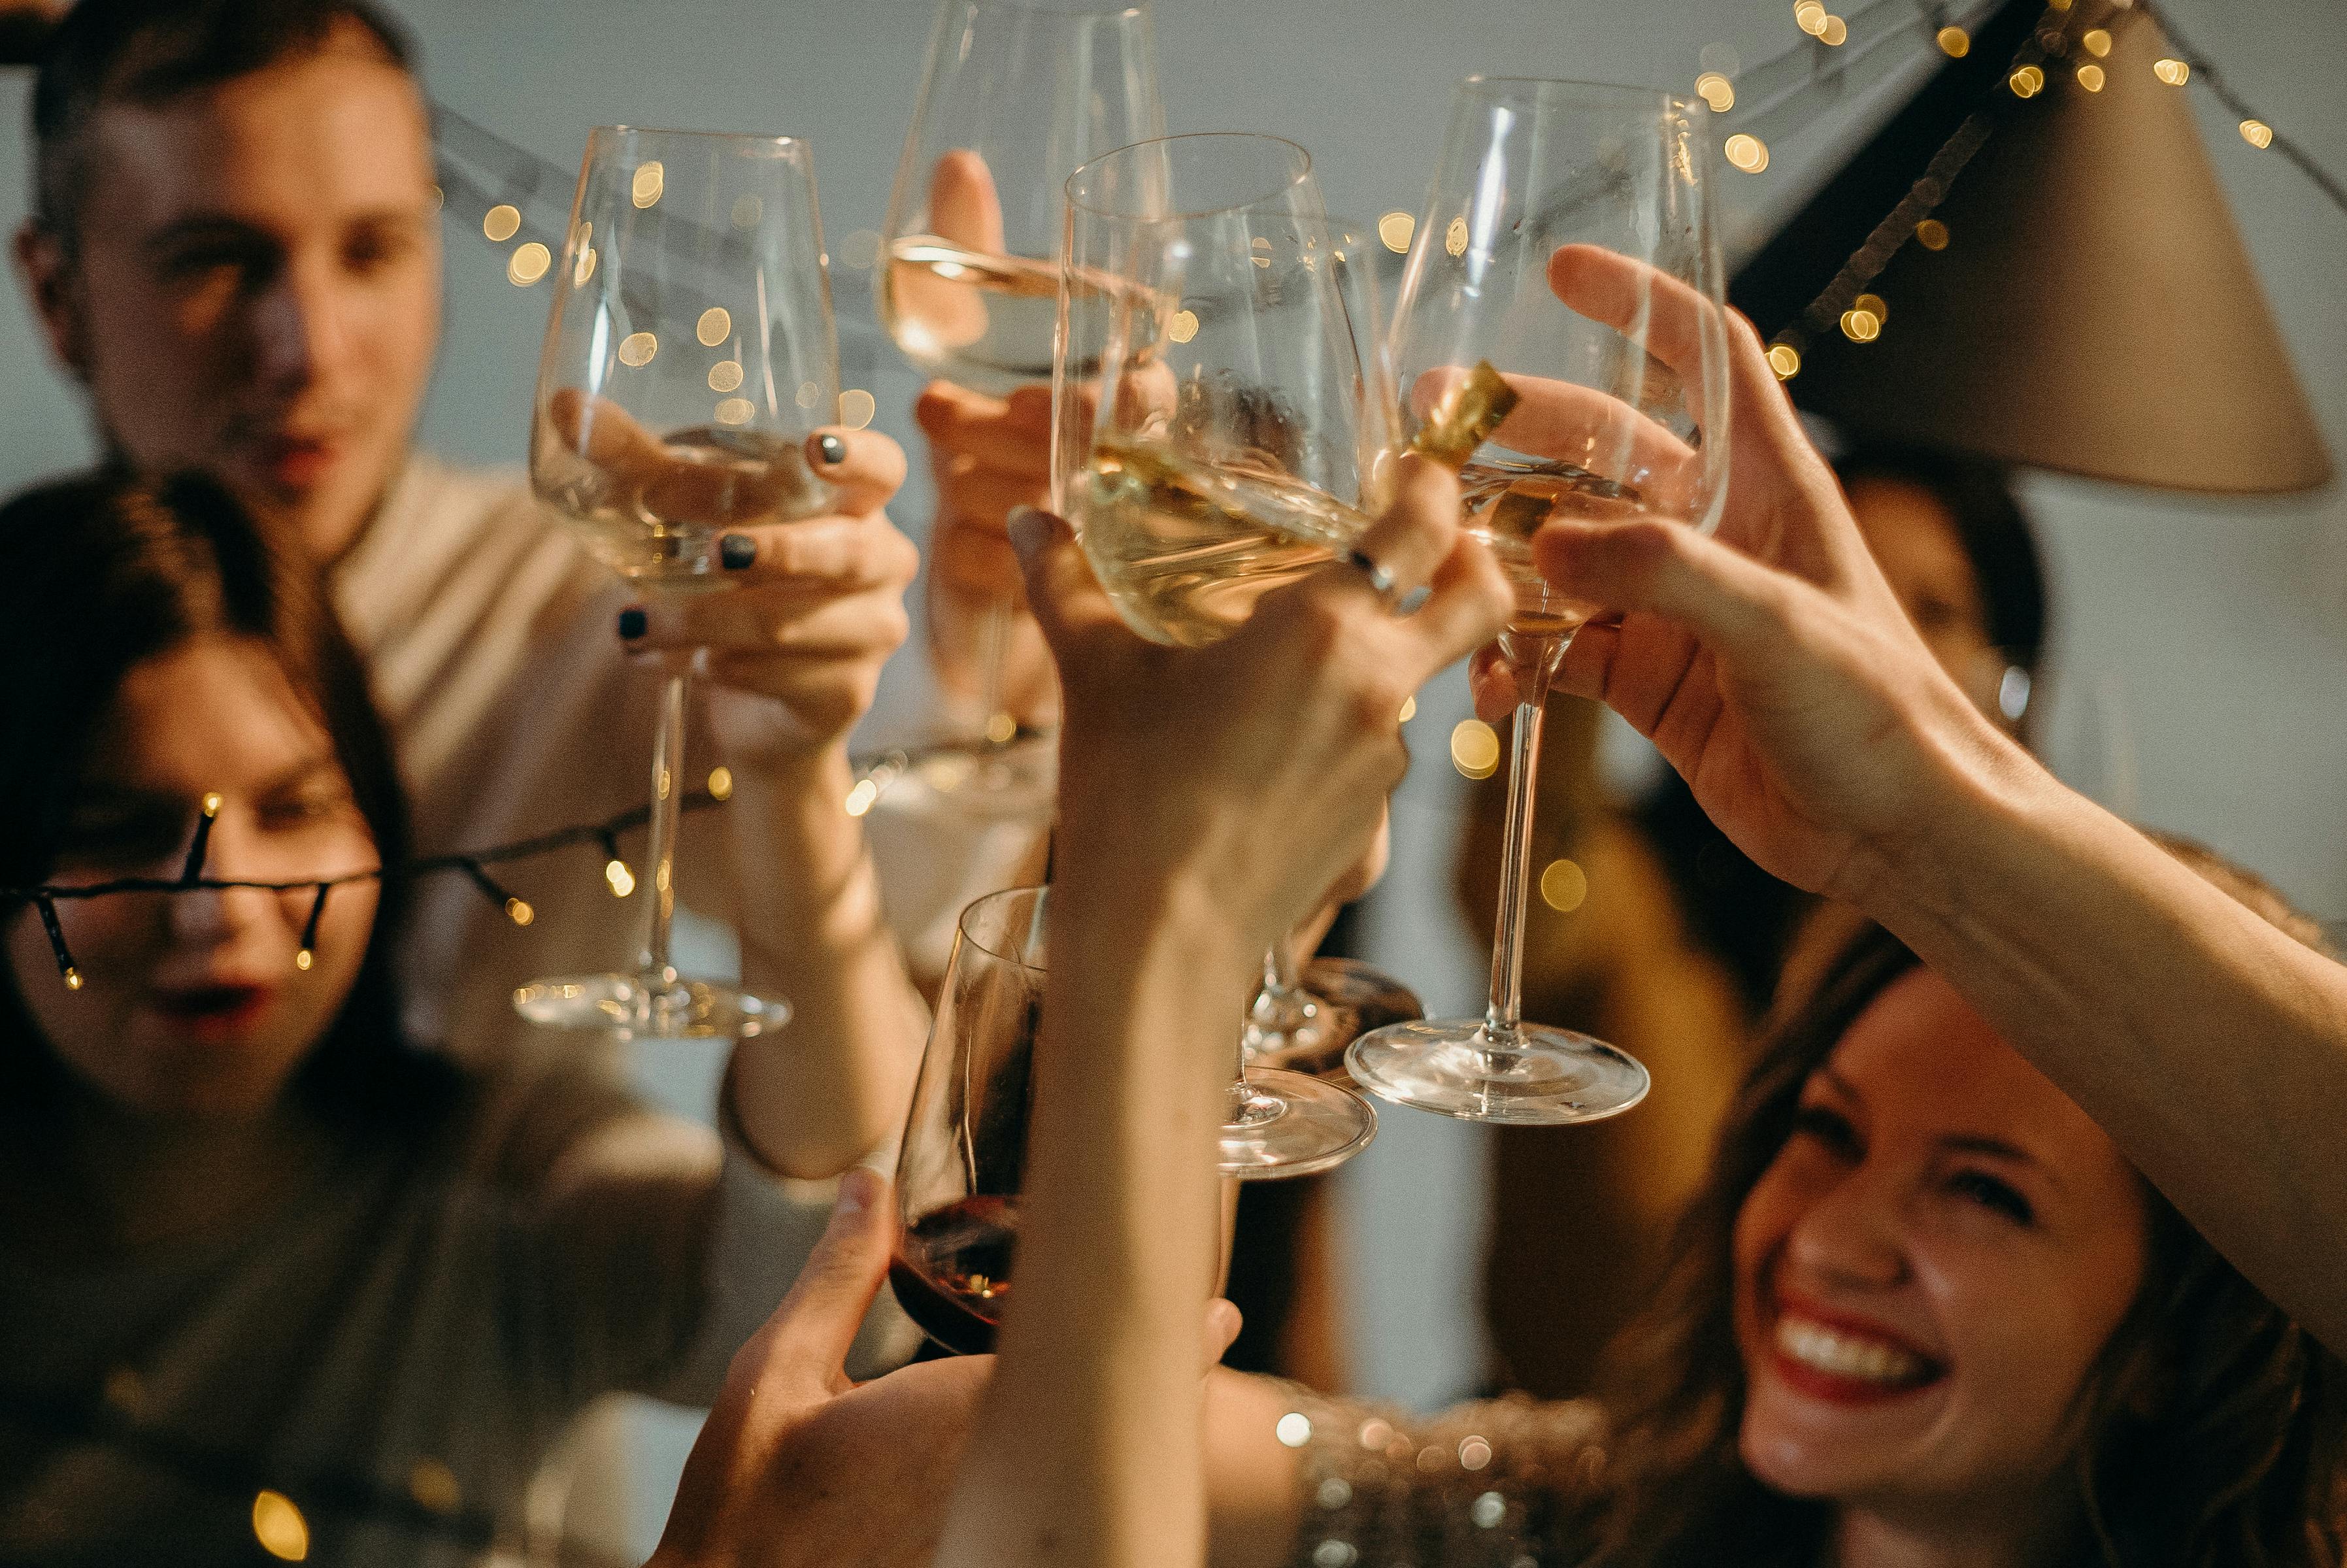 People holding their glasses up during a toast | Source: Pexels